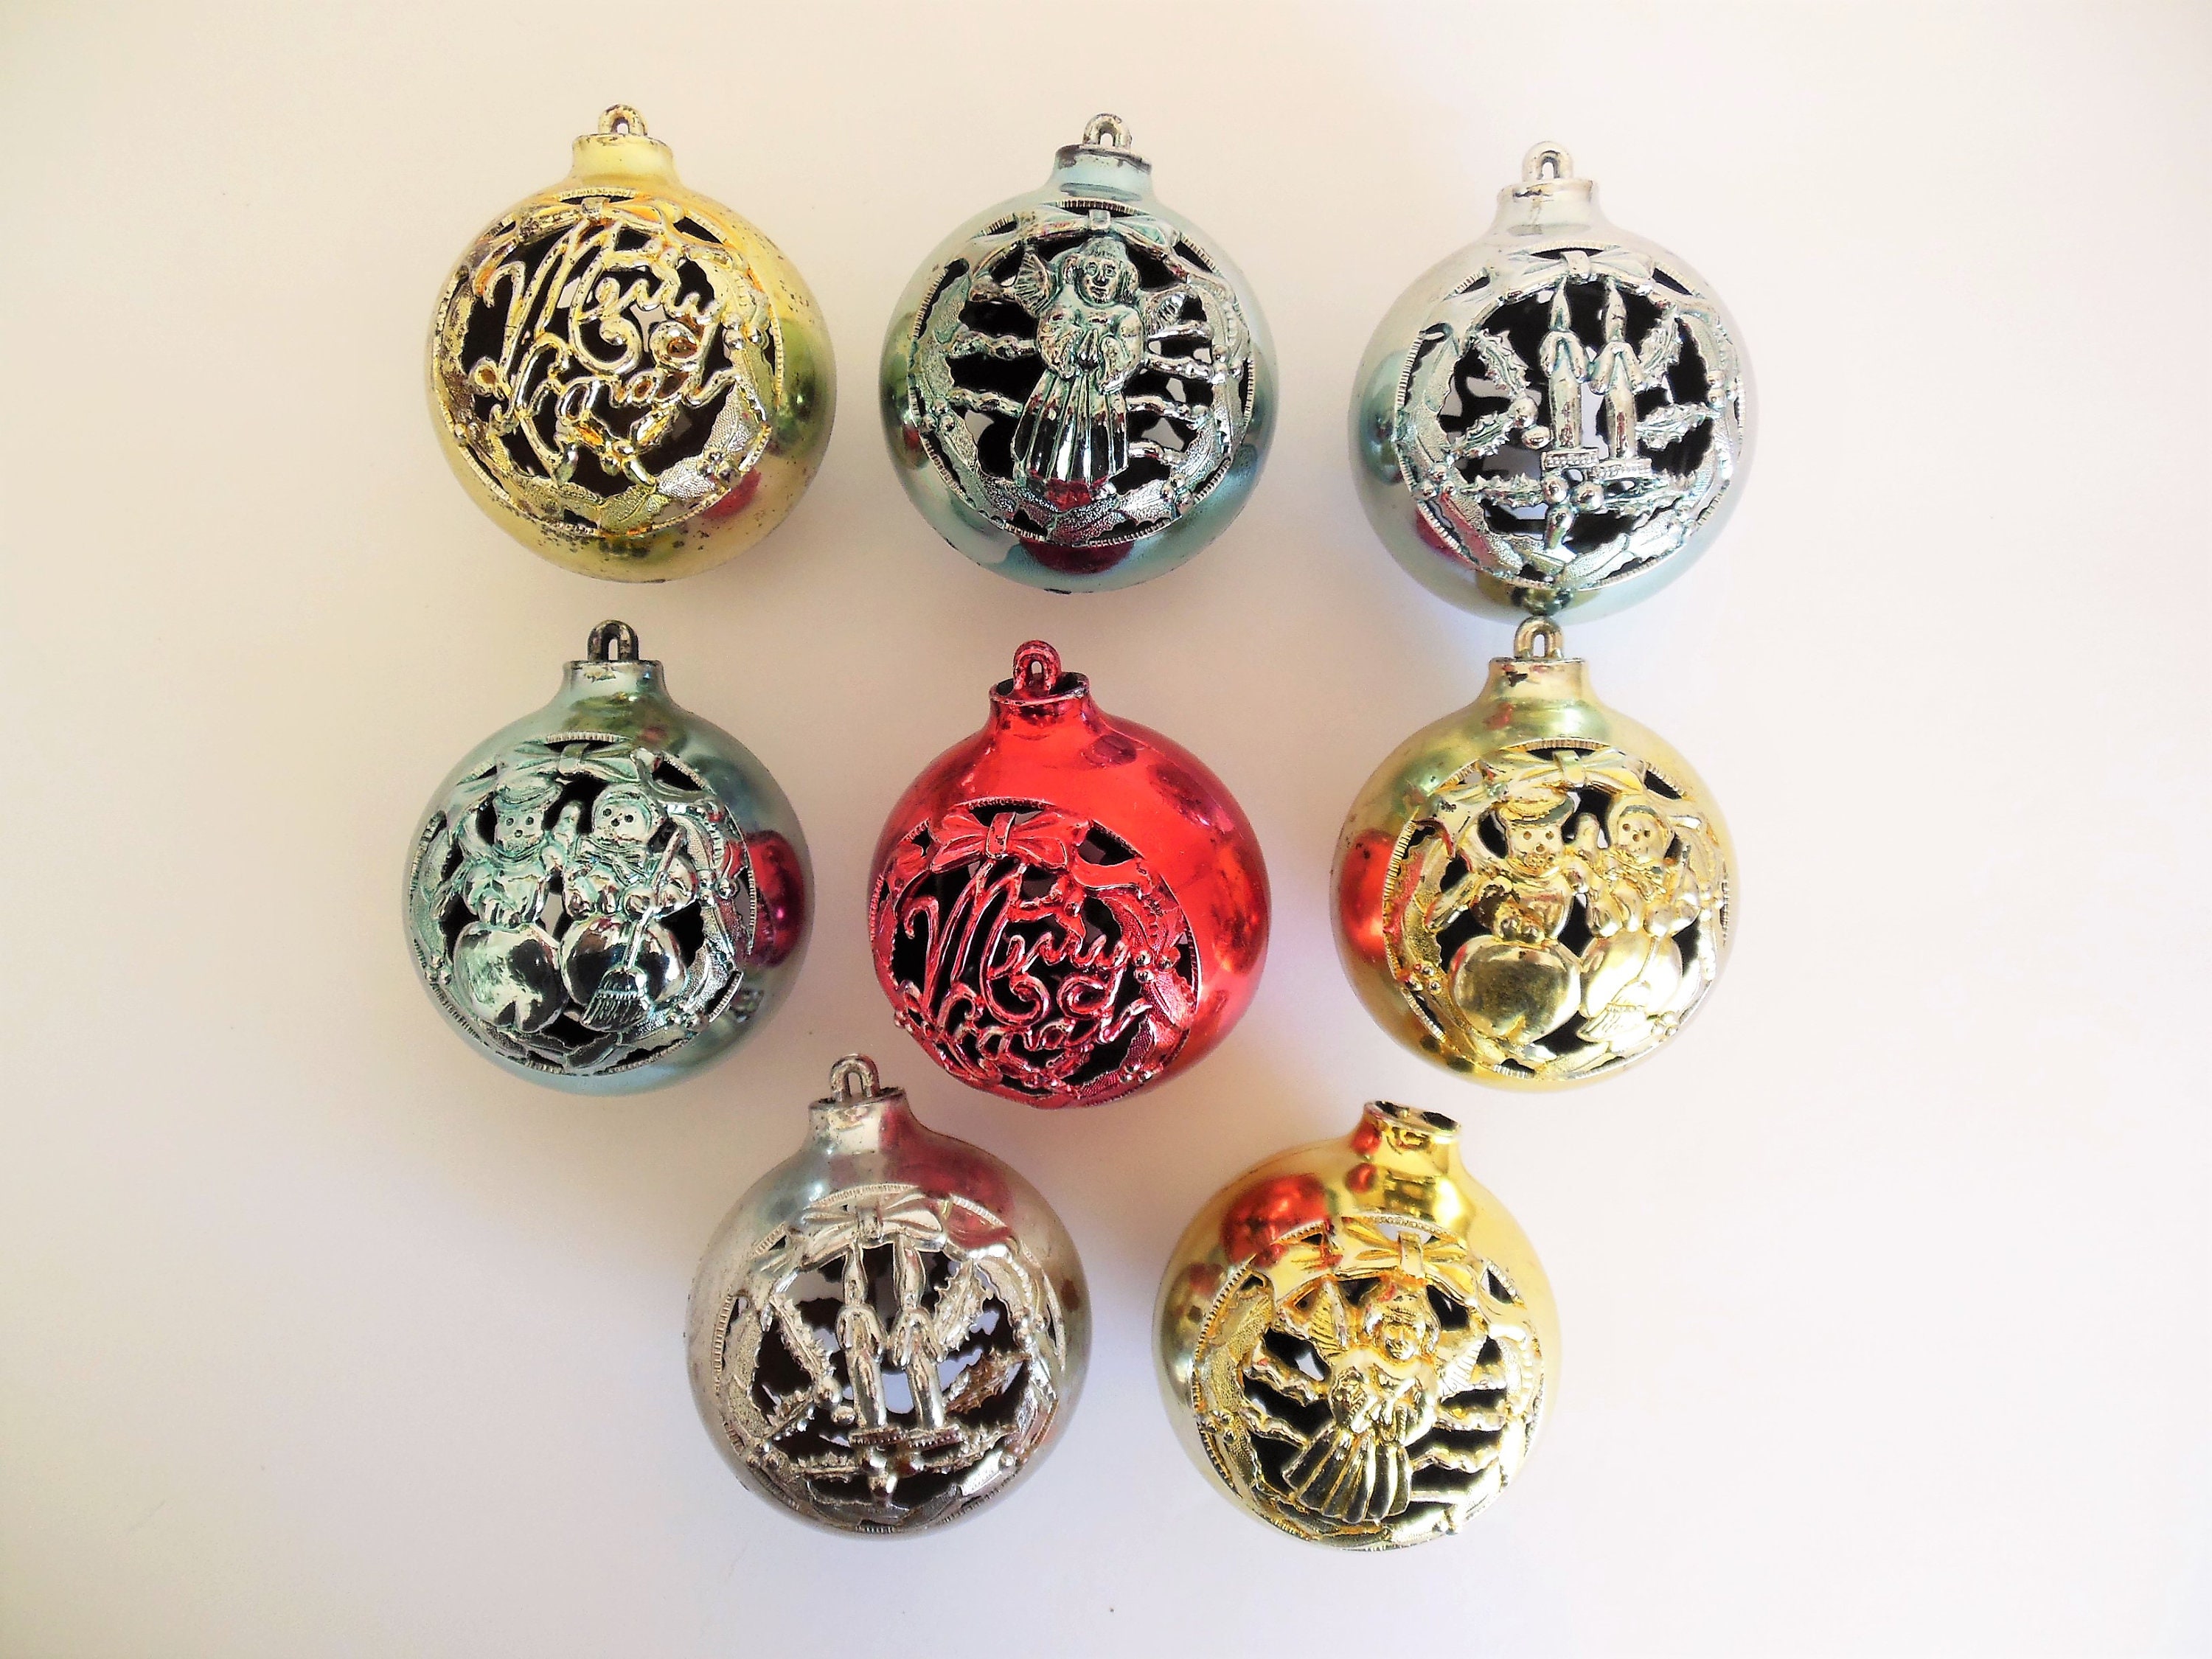 6 Pack 2.75 70mm Red and Black Swirl Ball Ornaments